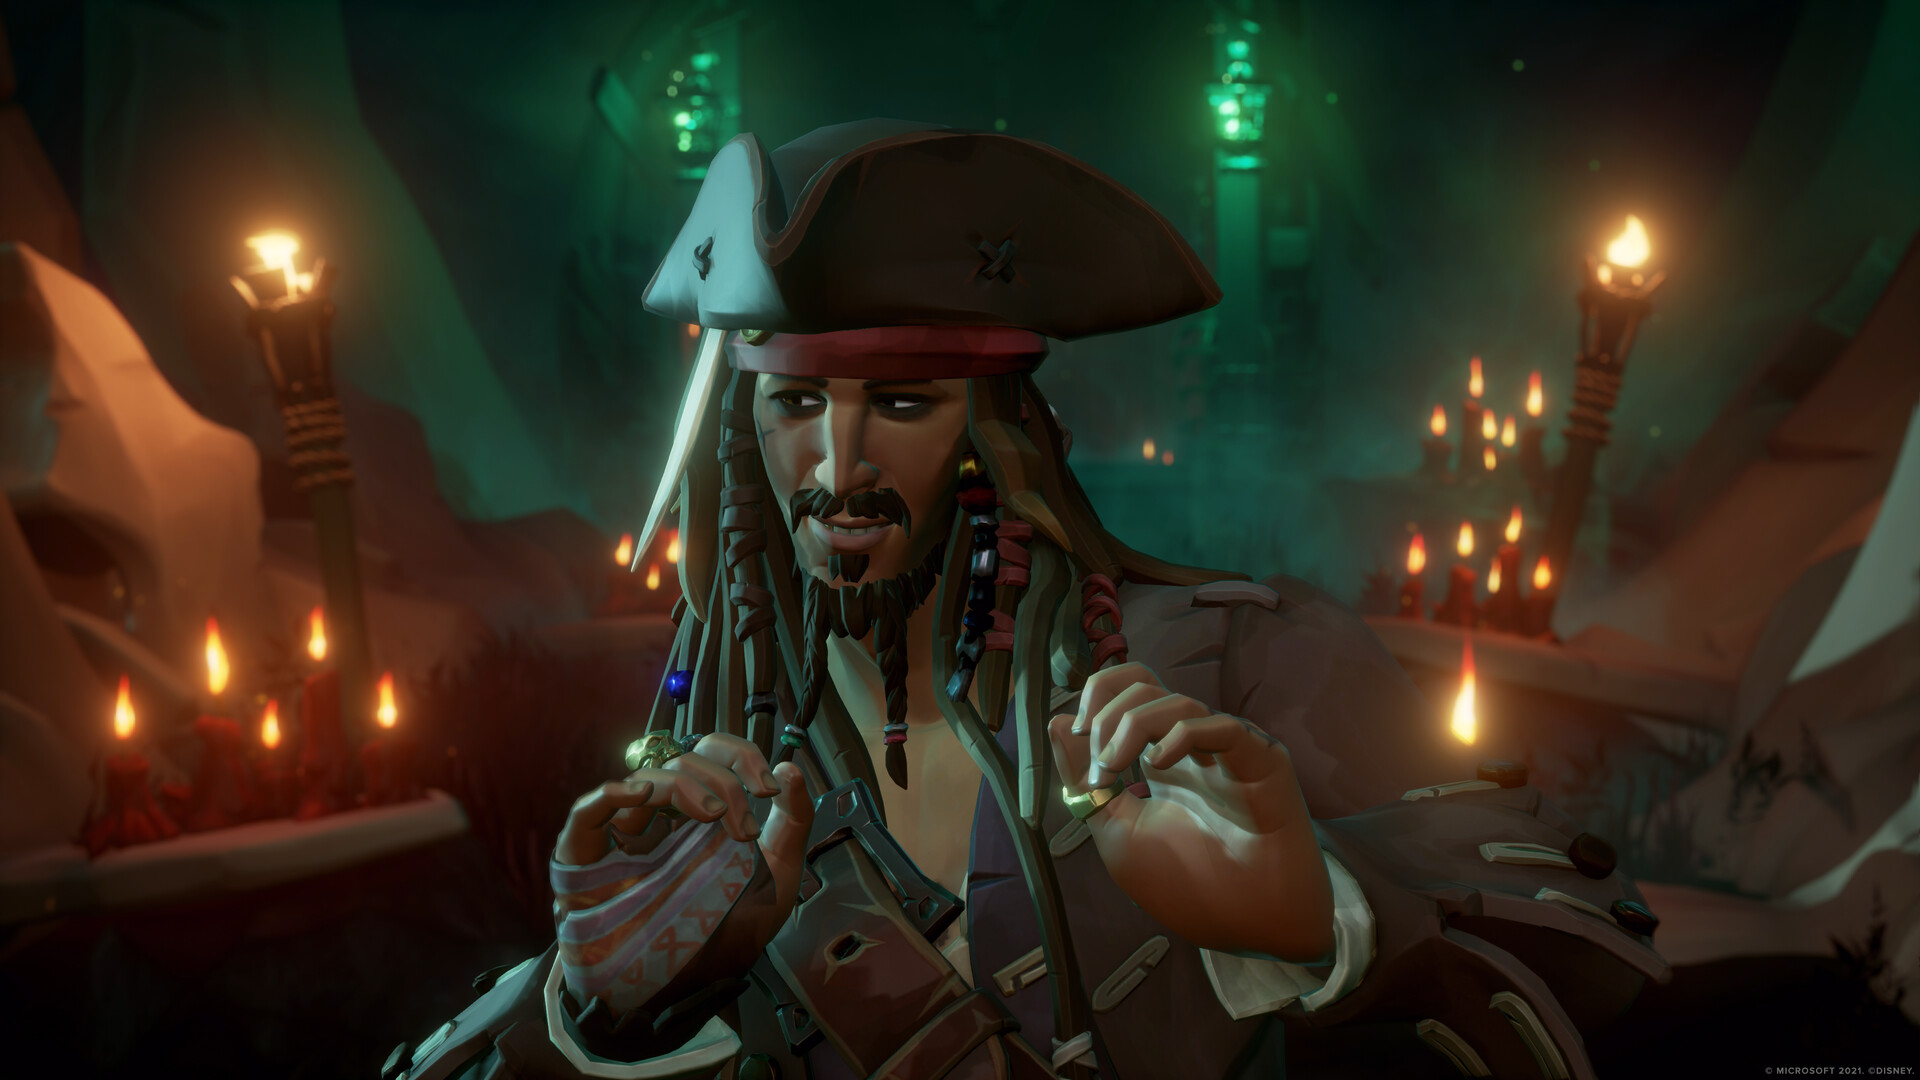 Save 50% on Sea of Thieves on Steam